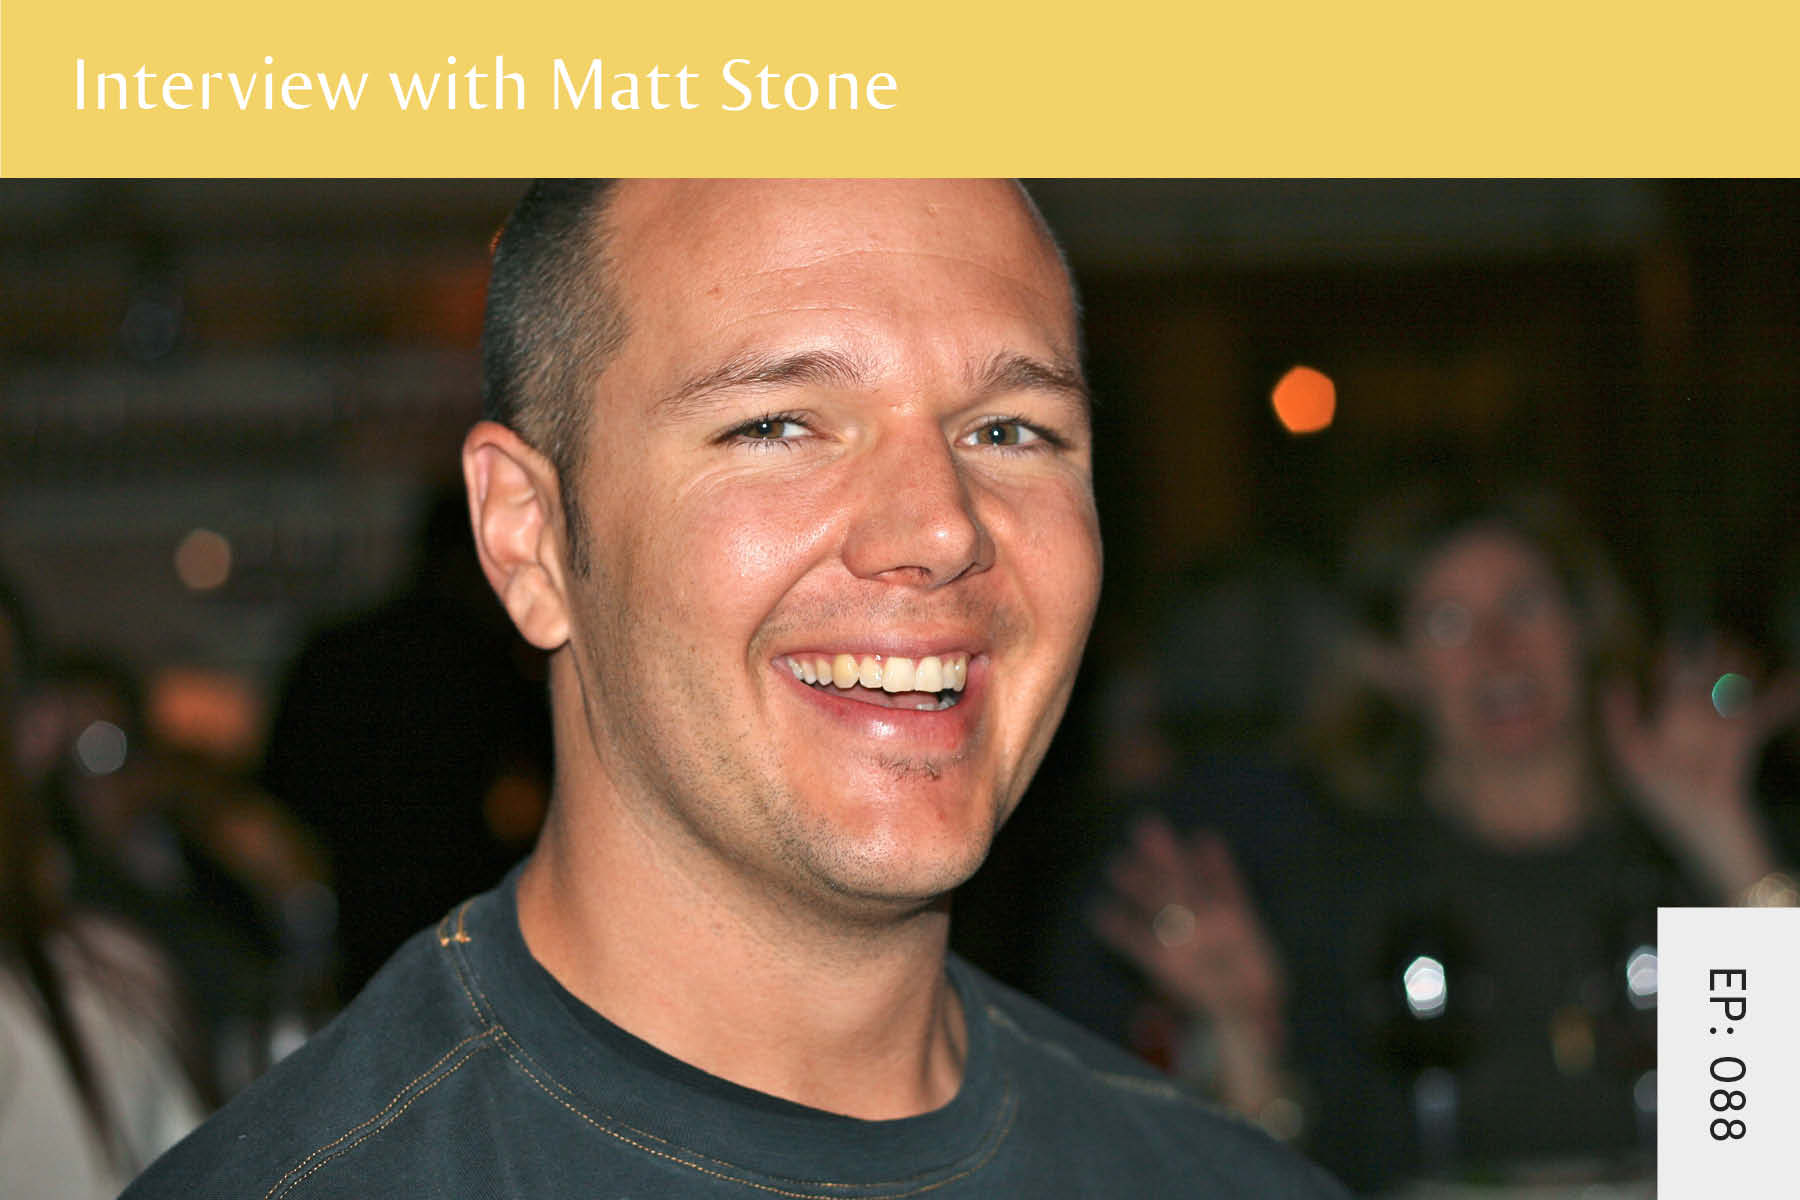 088: Interview with Matt Stone - Seven Health: Eating Disorder Recovery and Anti Diet Nutritionist